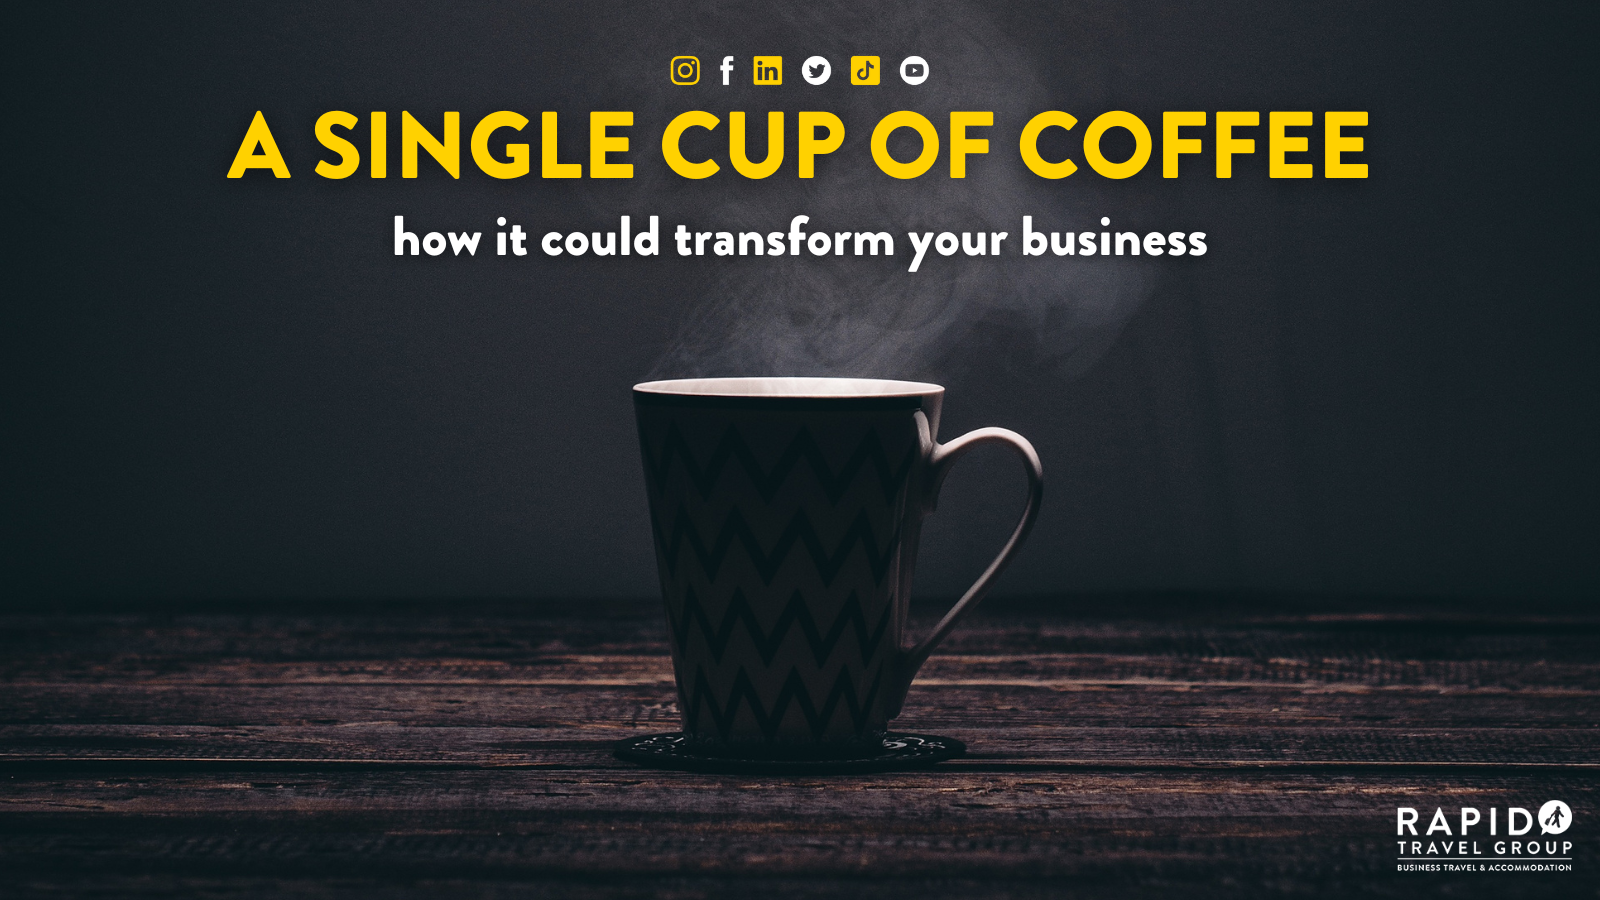 a single cup of coffee: how it could transform your business